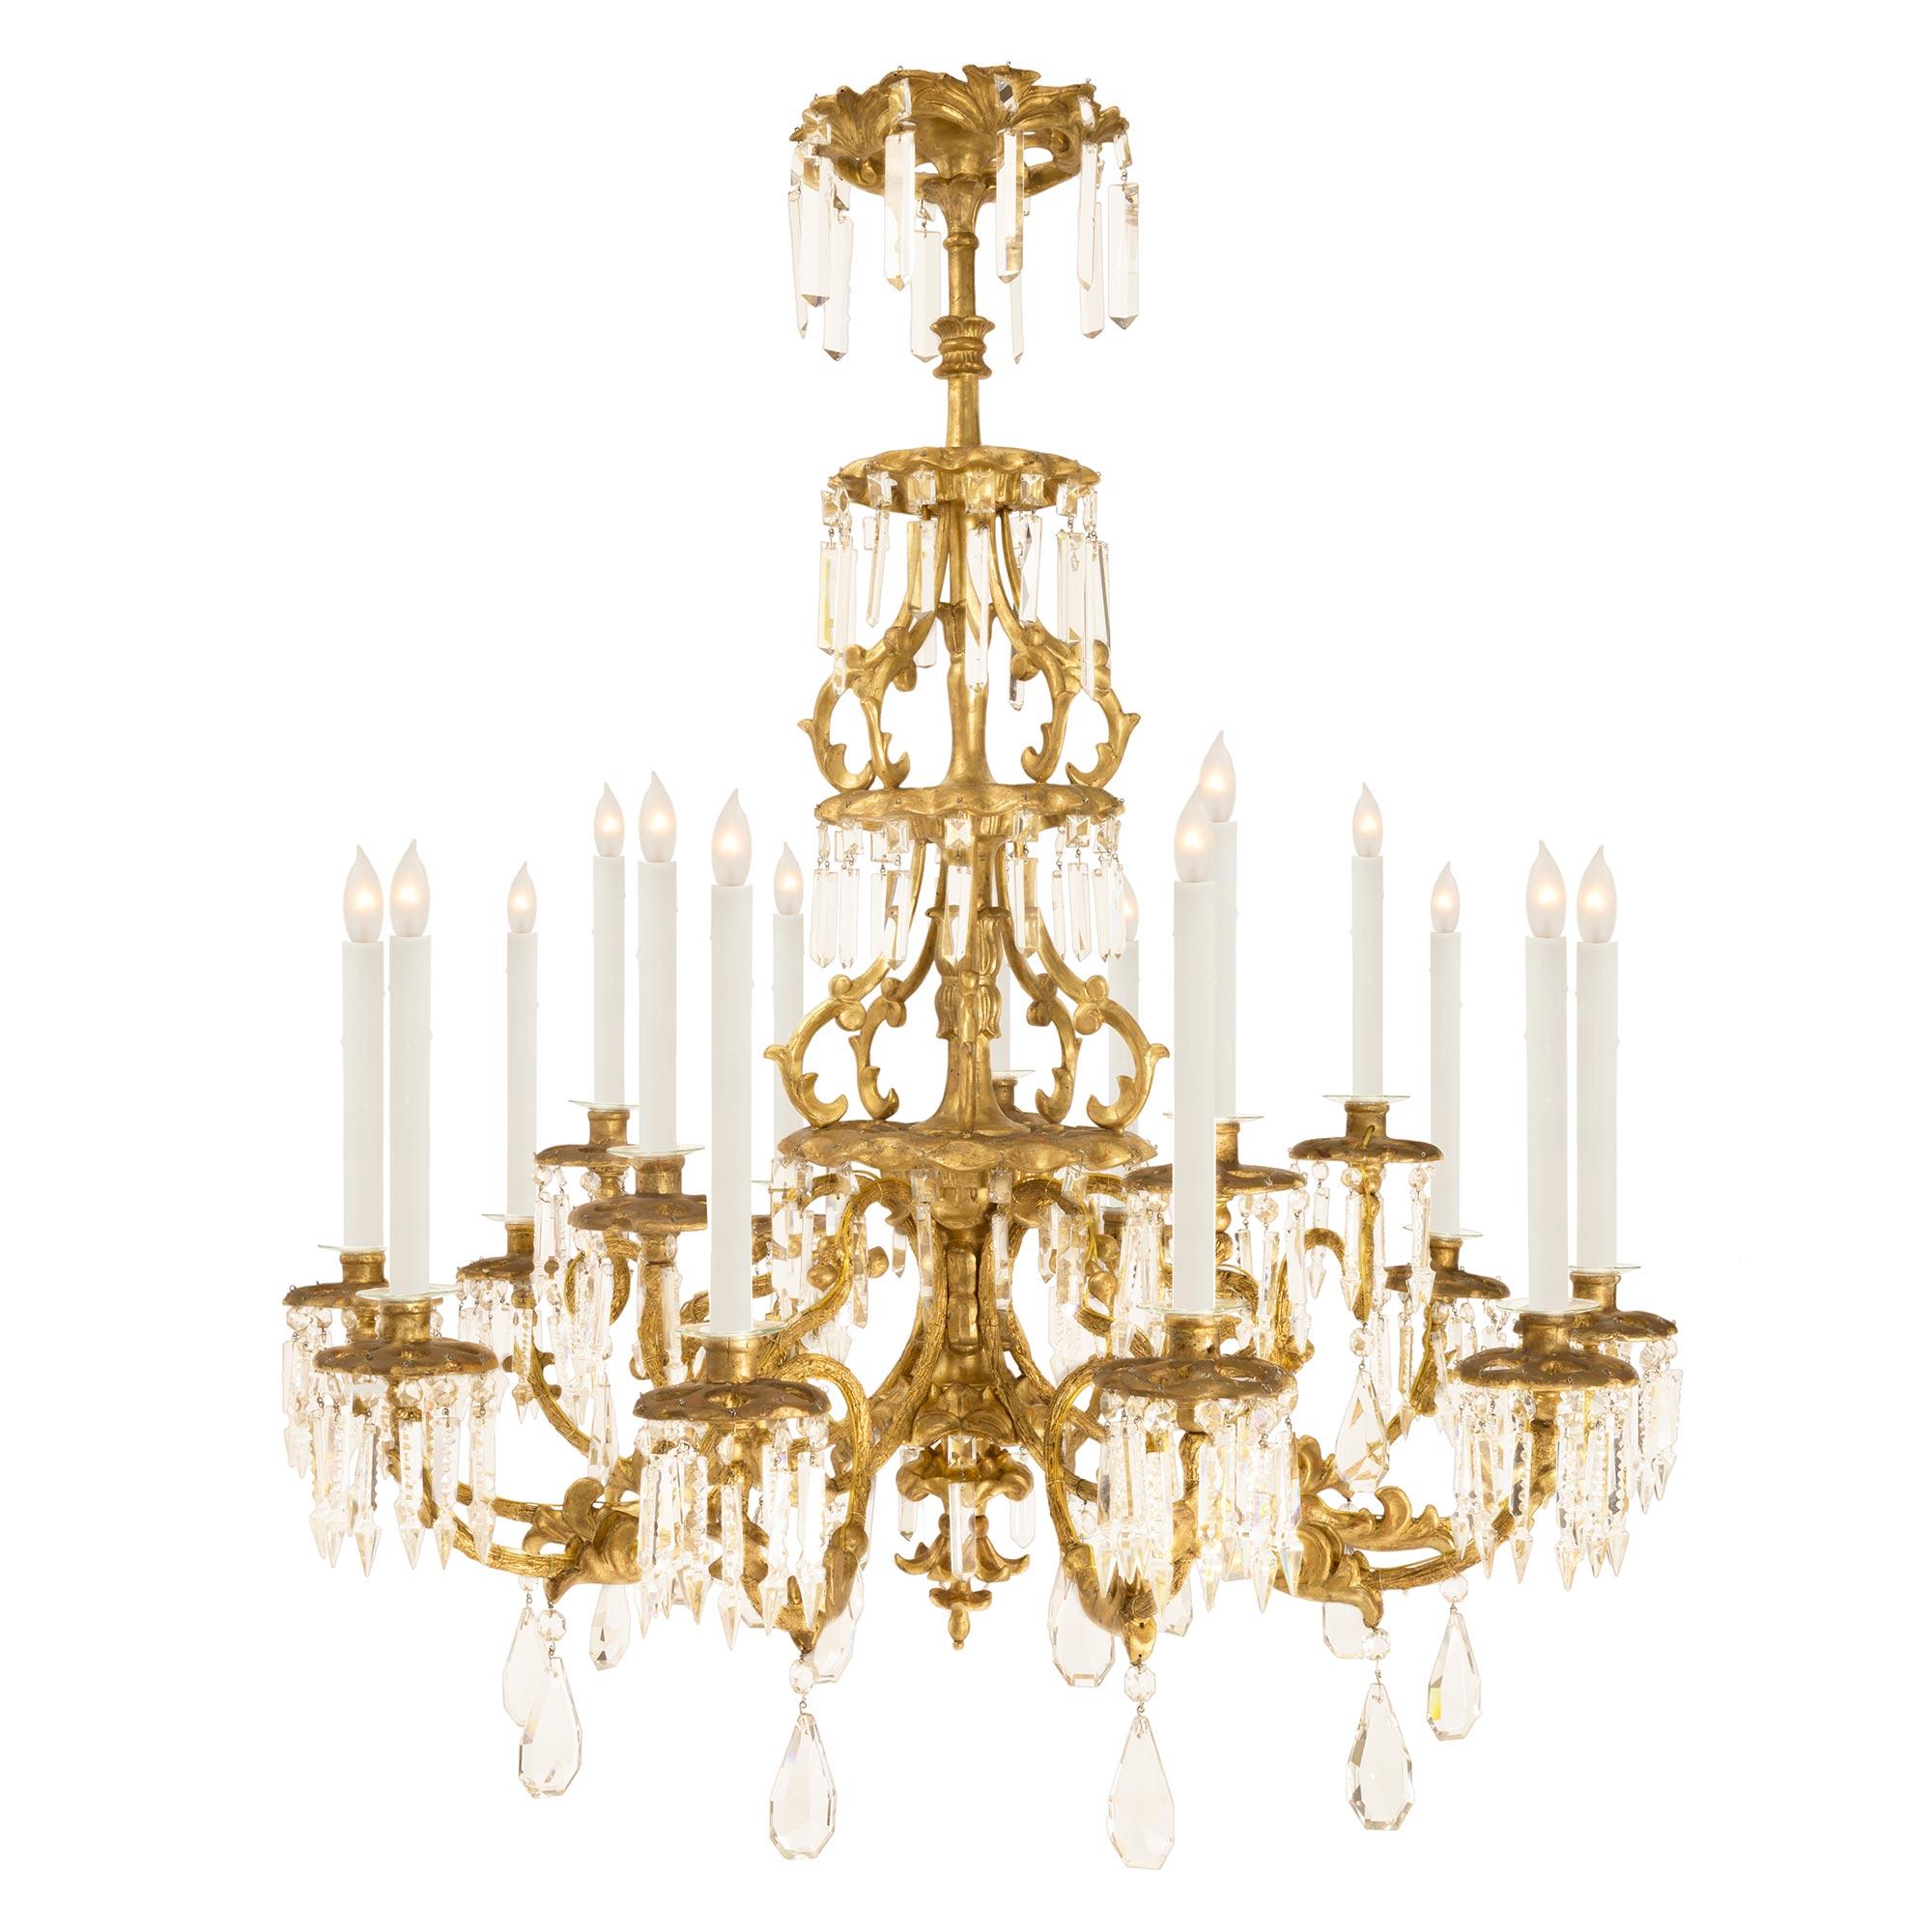 A sensational and unique Italian early 19th century Tuscan giltwood chandelier. The chandelier's fifteen arms are divided among five groups of three electrified candles and split between two tiers. Each arm has a branch like design which leads to a